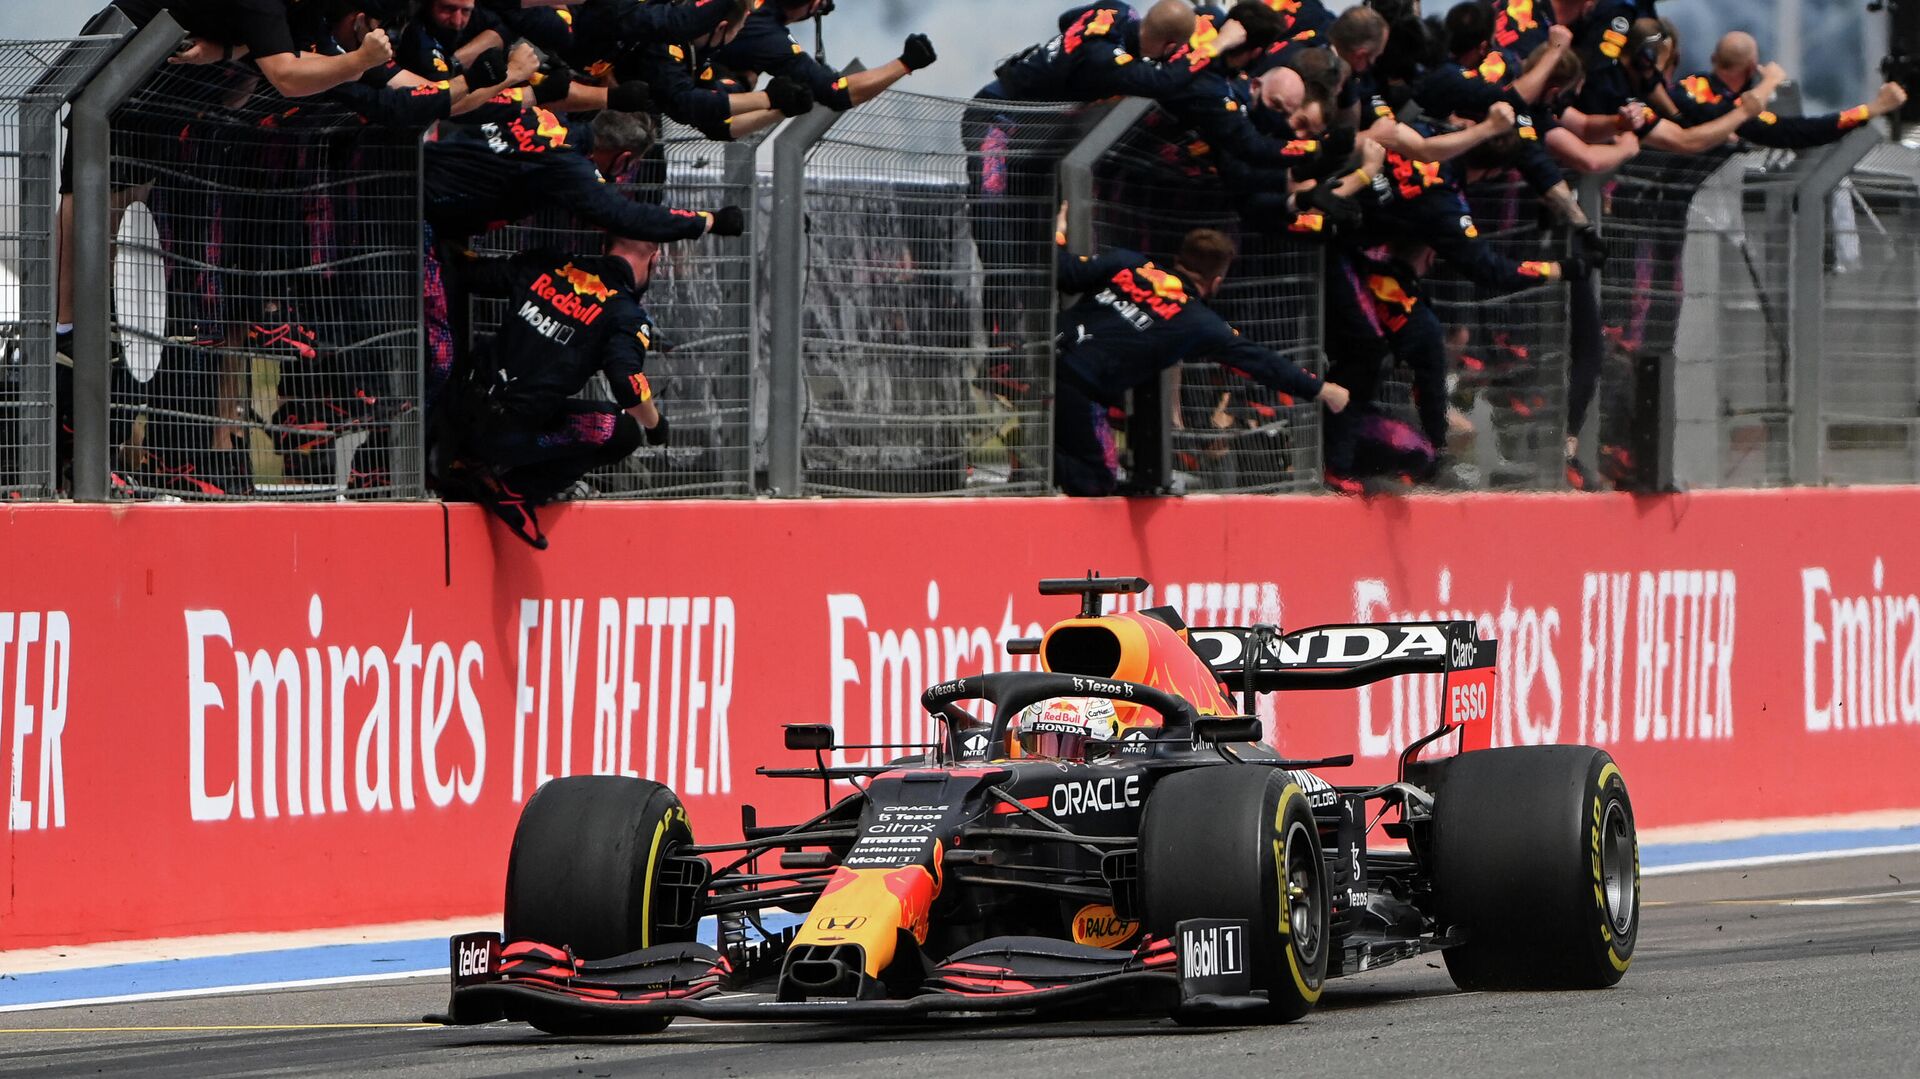 Red Bull's team members celebrate as winner Red Bull's Dutch driver Max Verstappen crosses the finish line during the French Formula One Grand Prix at the Circuit Paul-Ricard in Le Castellet, southern France, on June 20, 2021. (Photo by CHRISTOPHE SIMON / AFP) - РИА Новости, 1920, 20.06.2021